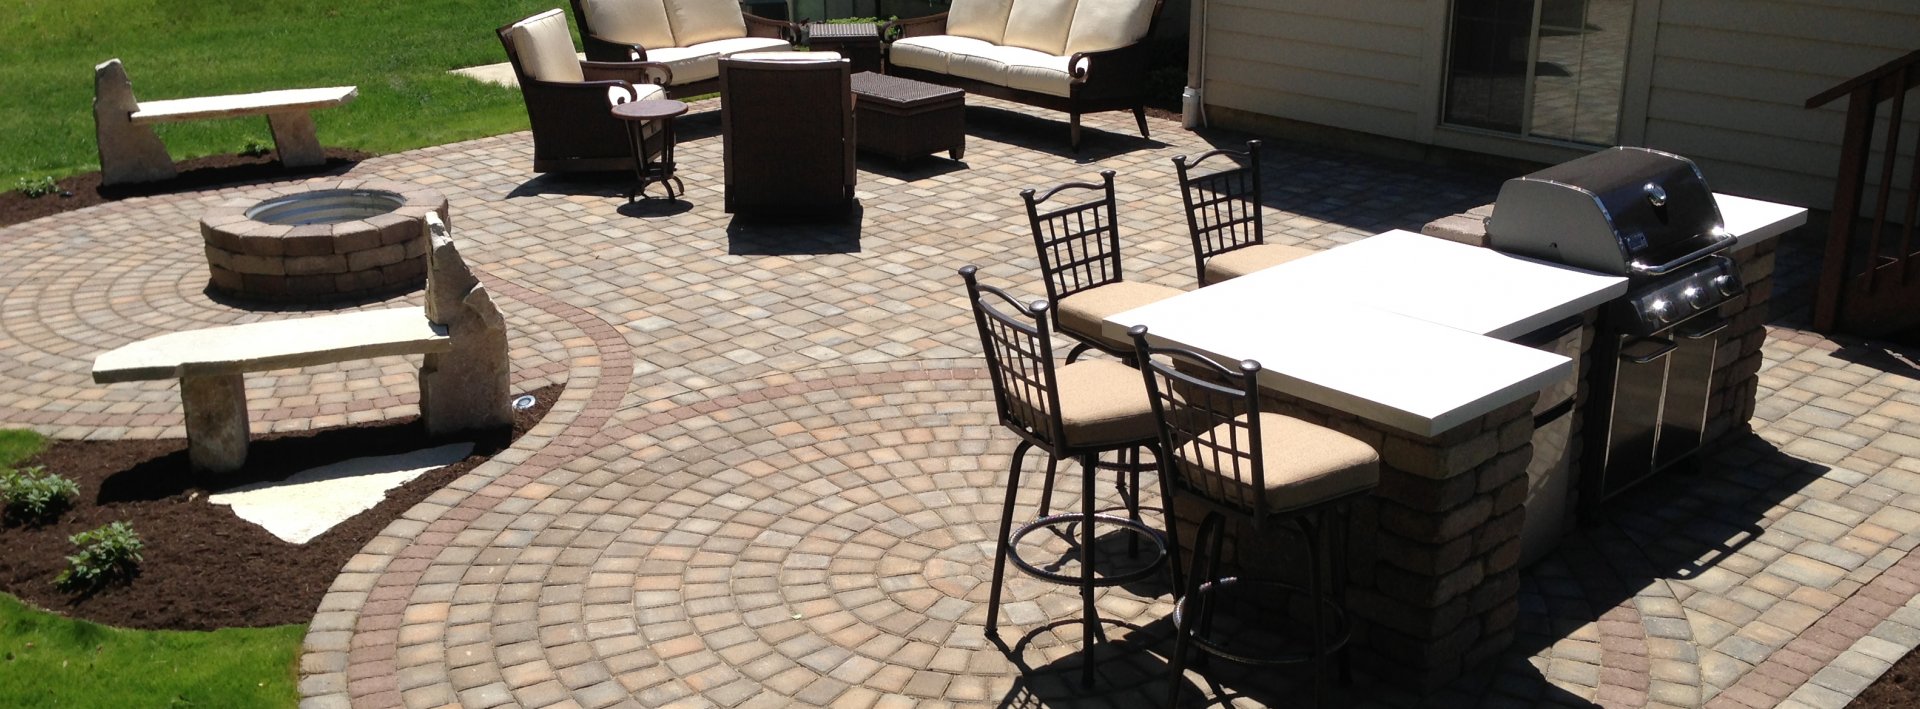 Paver deck, fire feature and grill